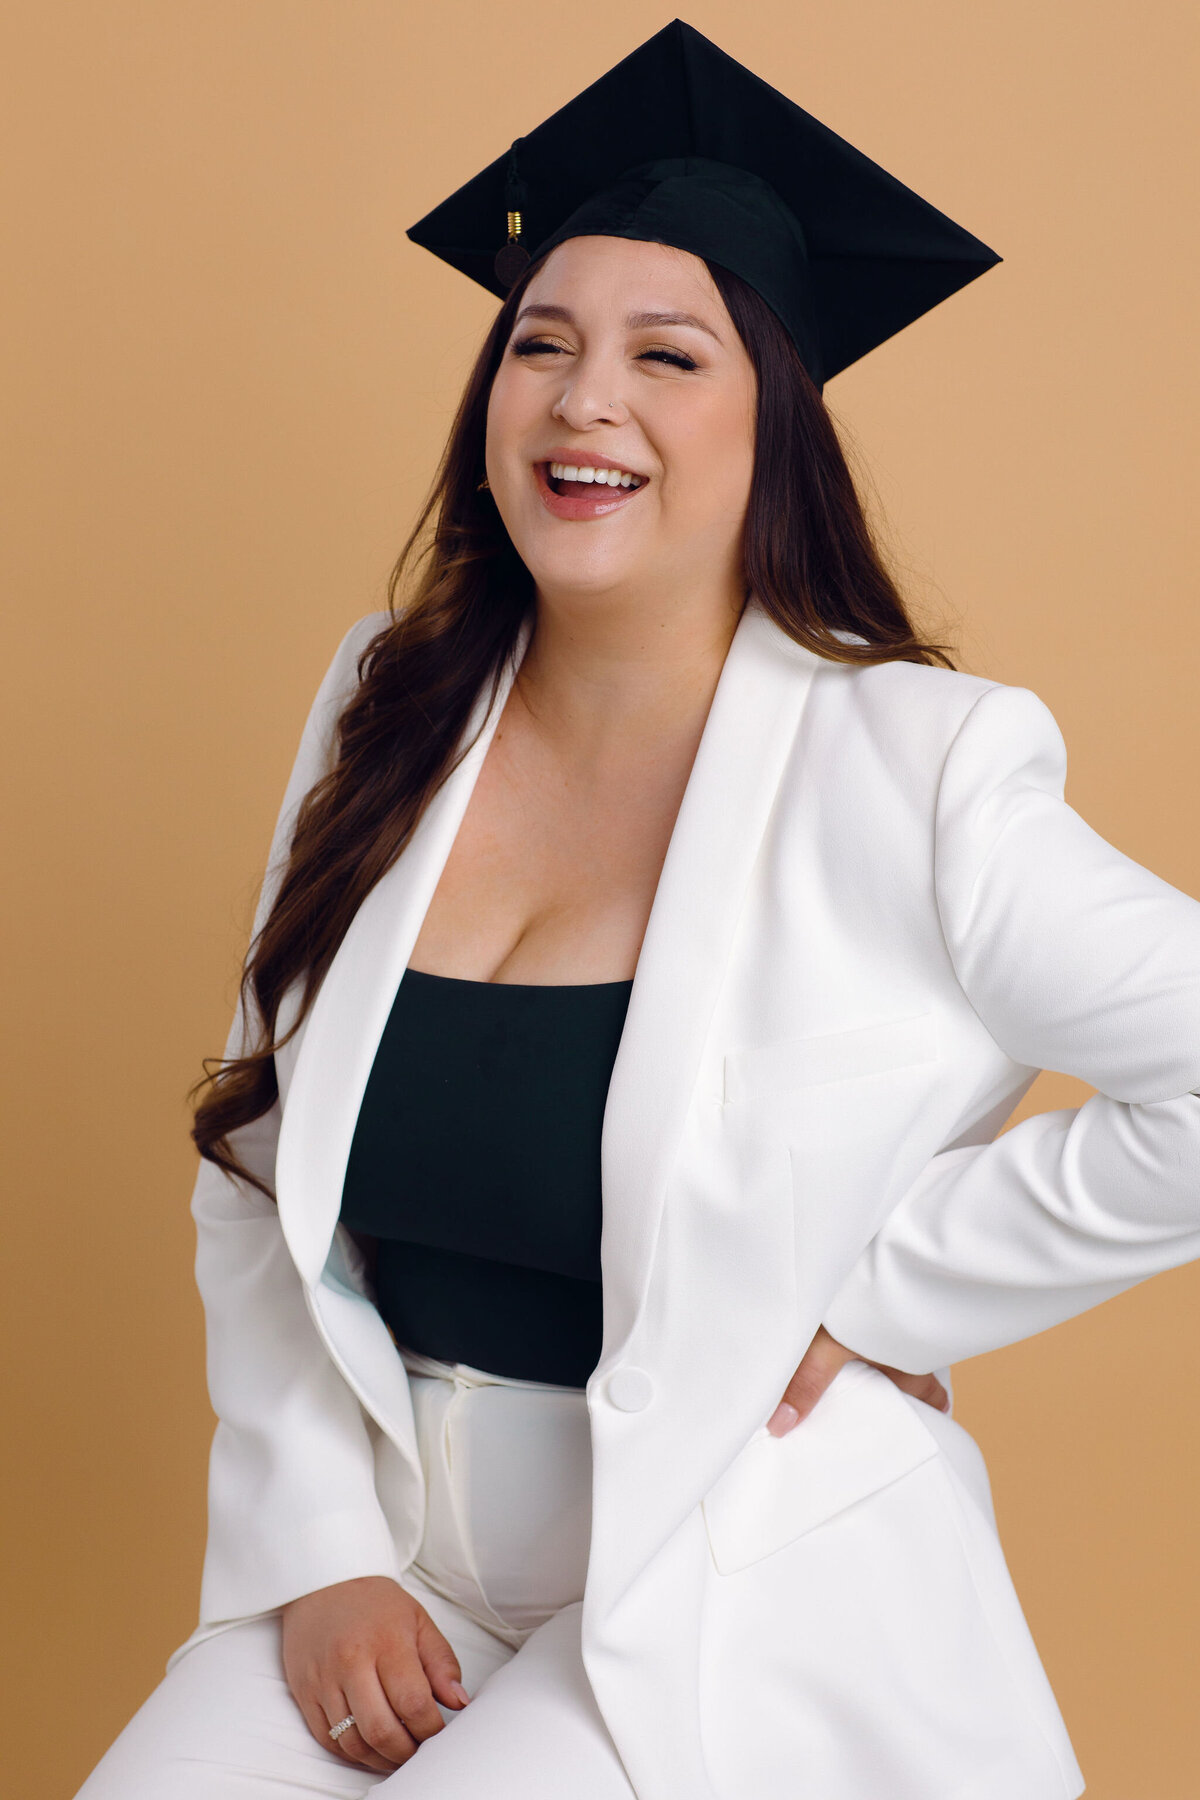 Graduation Portrait Of Young Woman In White Suit And Black Tube Laughing Los Angeles